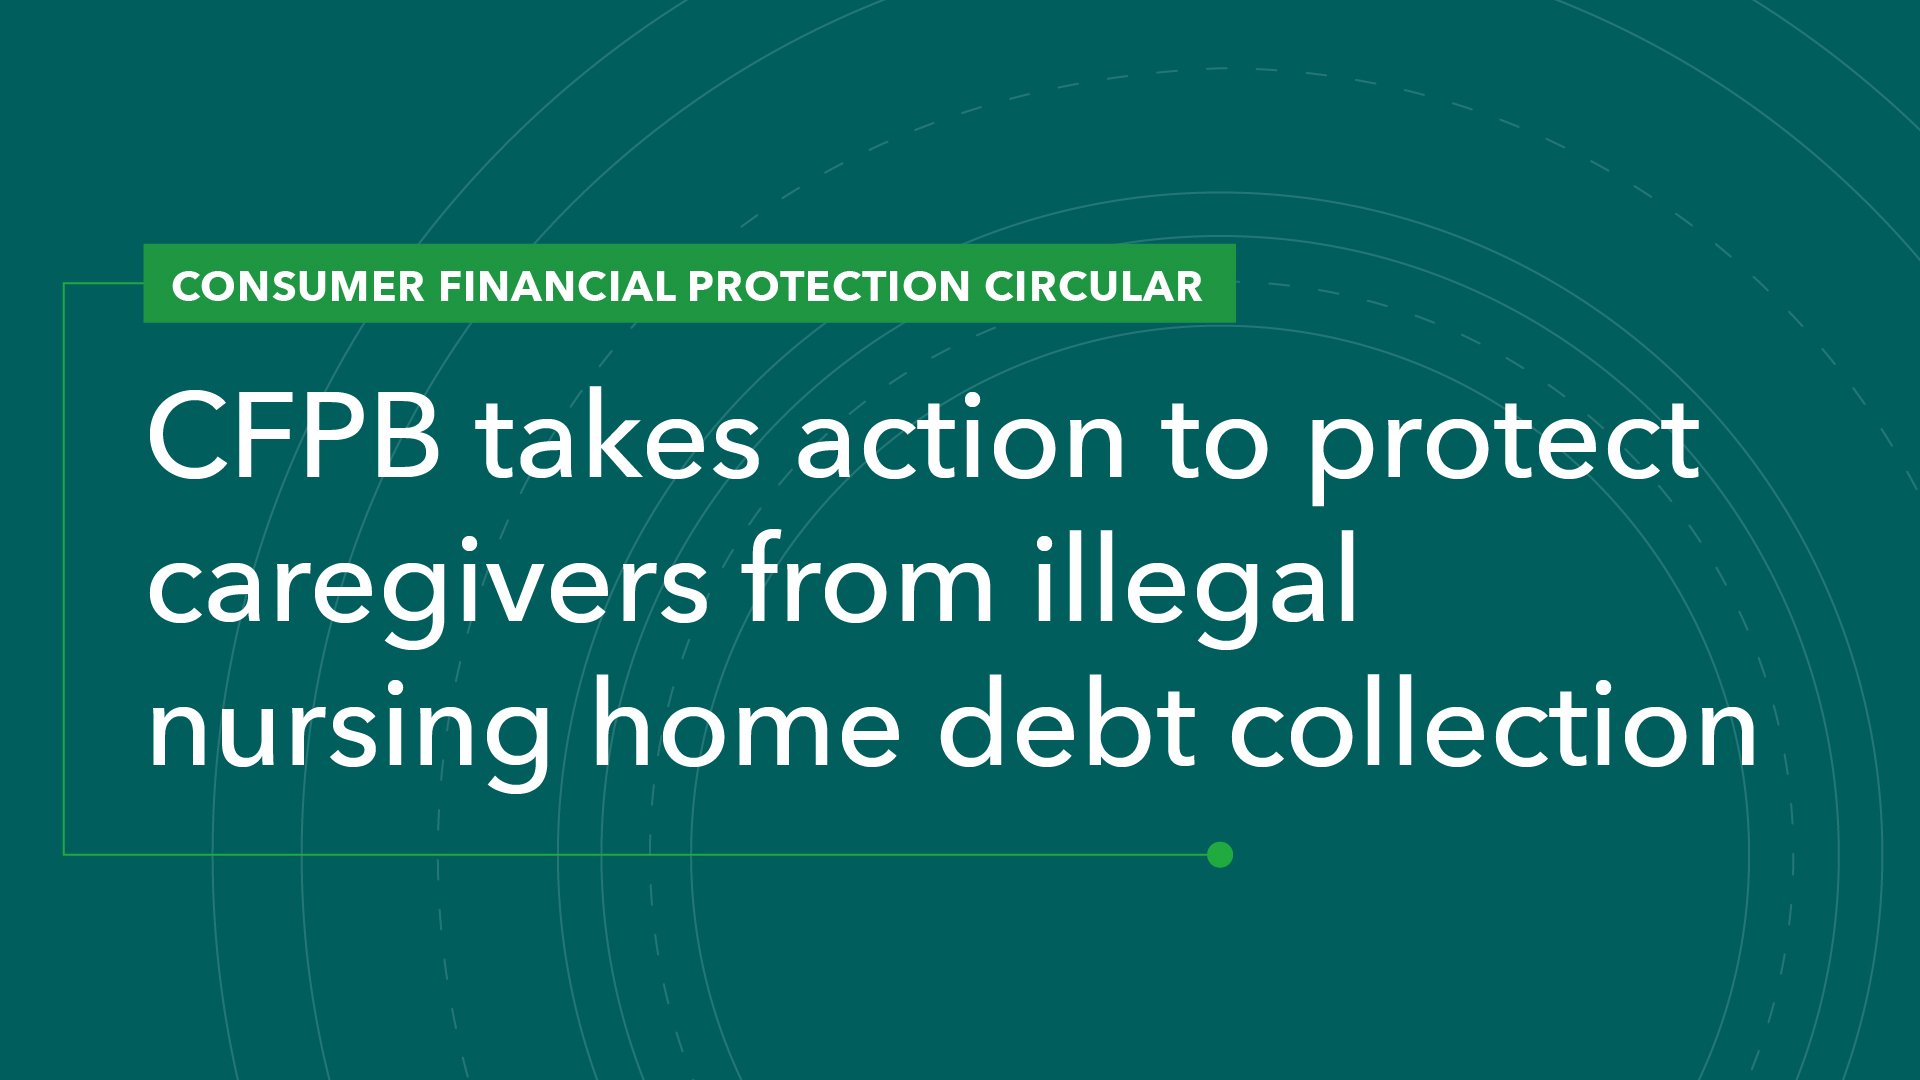 CFPB and Centers for Medicare and Medicaid Services Take Action to Protect Caregivers and Families from Illegal Nursing Home Debt Collection Practices